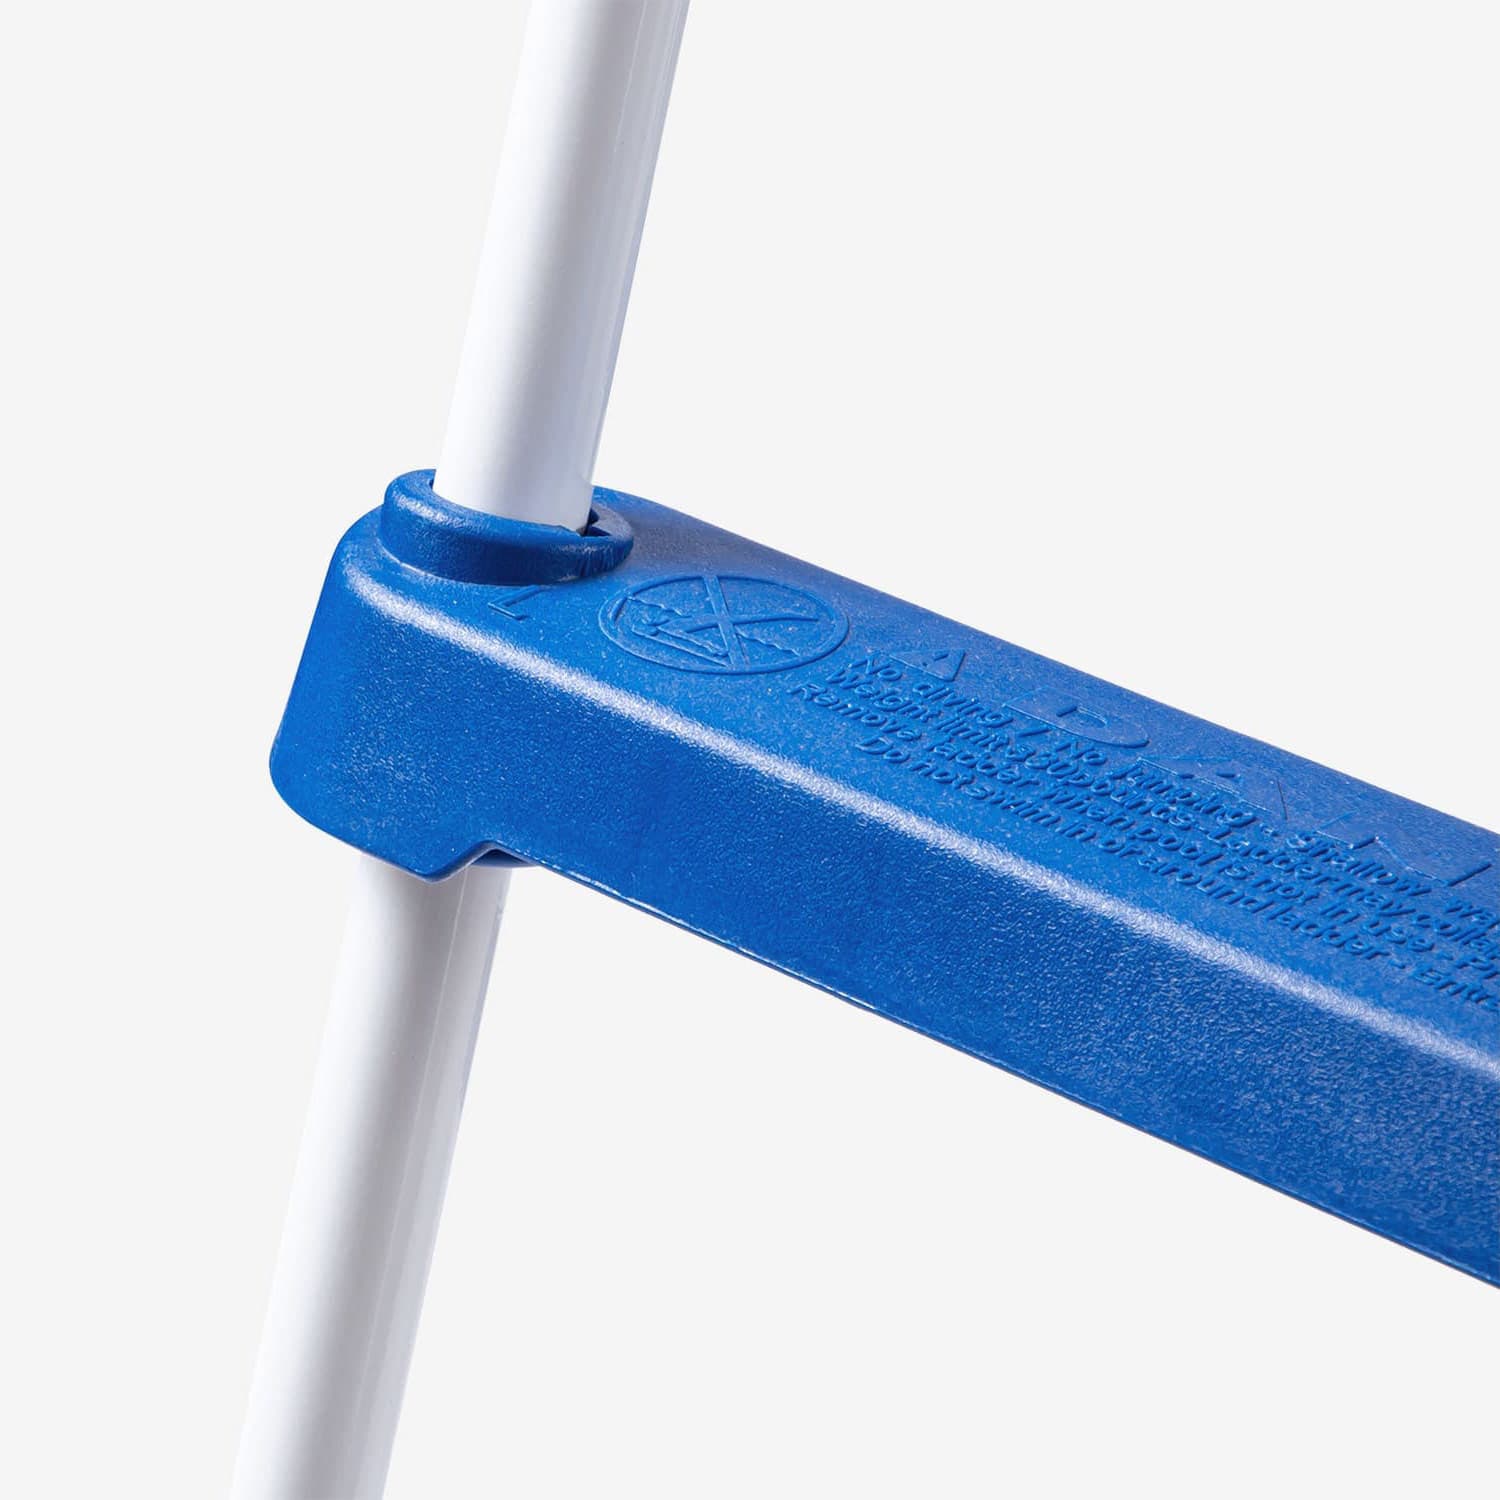 Funsicle 36" SureStep Ladder close up view